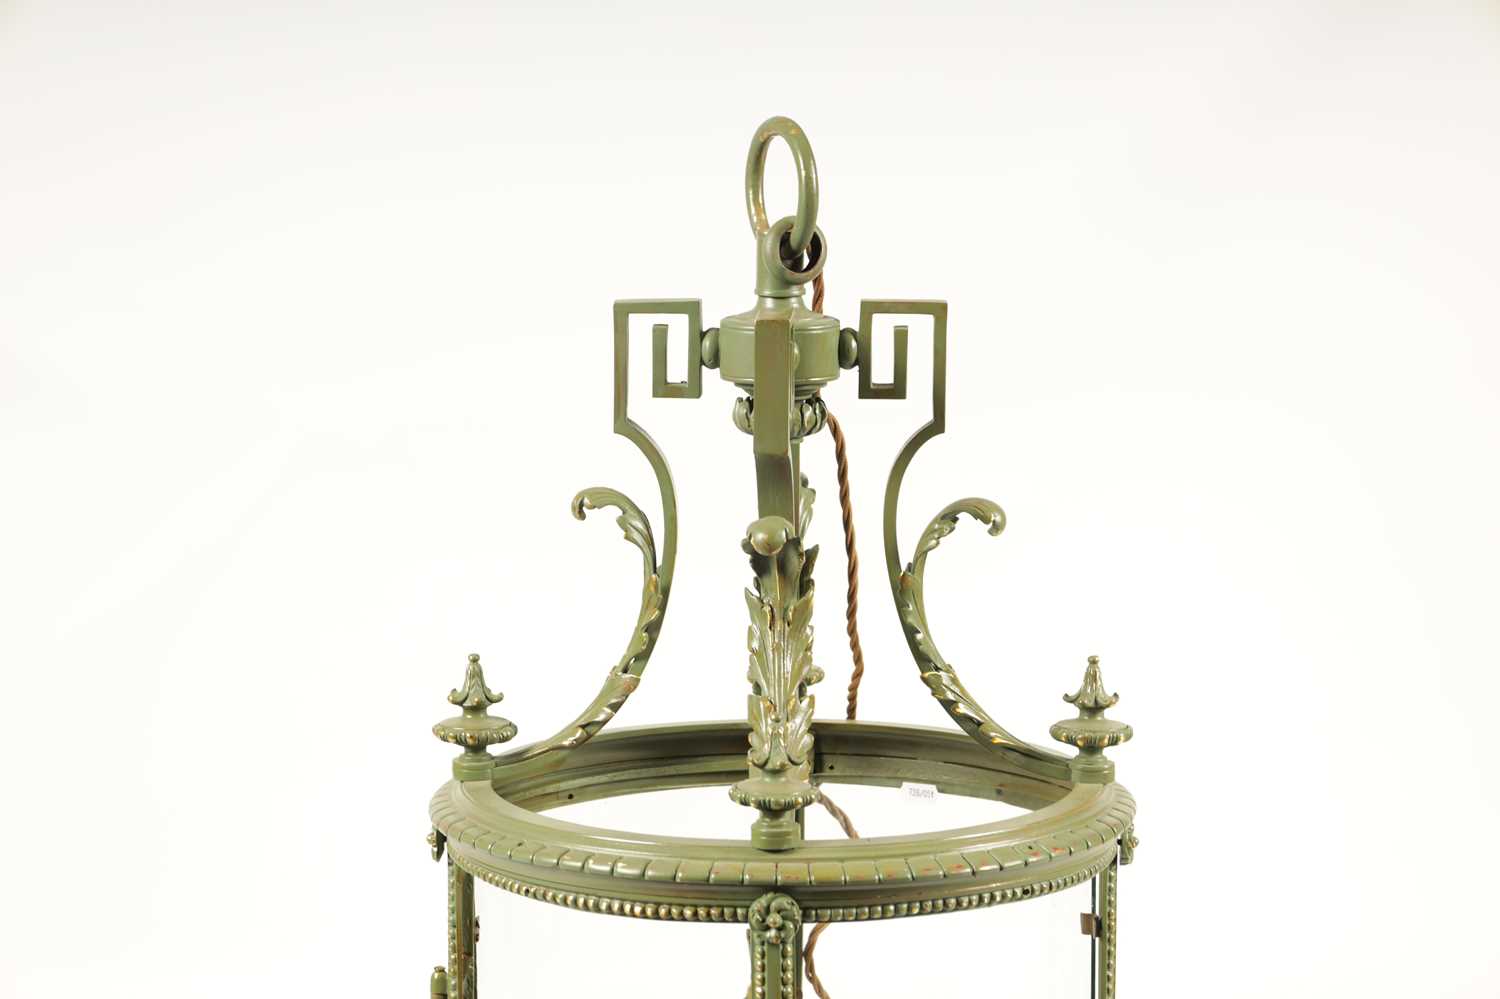 A LATE 19TH/EARLY 20TH CENTURY LATER PAINTED GILT BRASS HALL LANTERN OF LARGE SIZE - Image 2 of 6